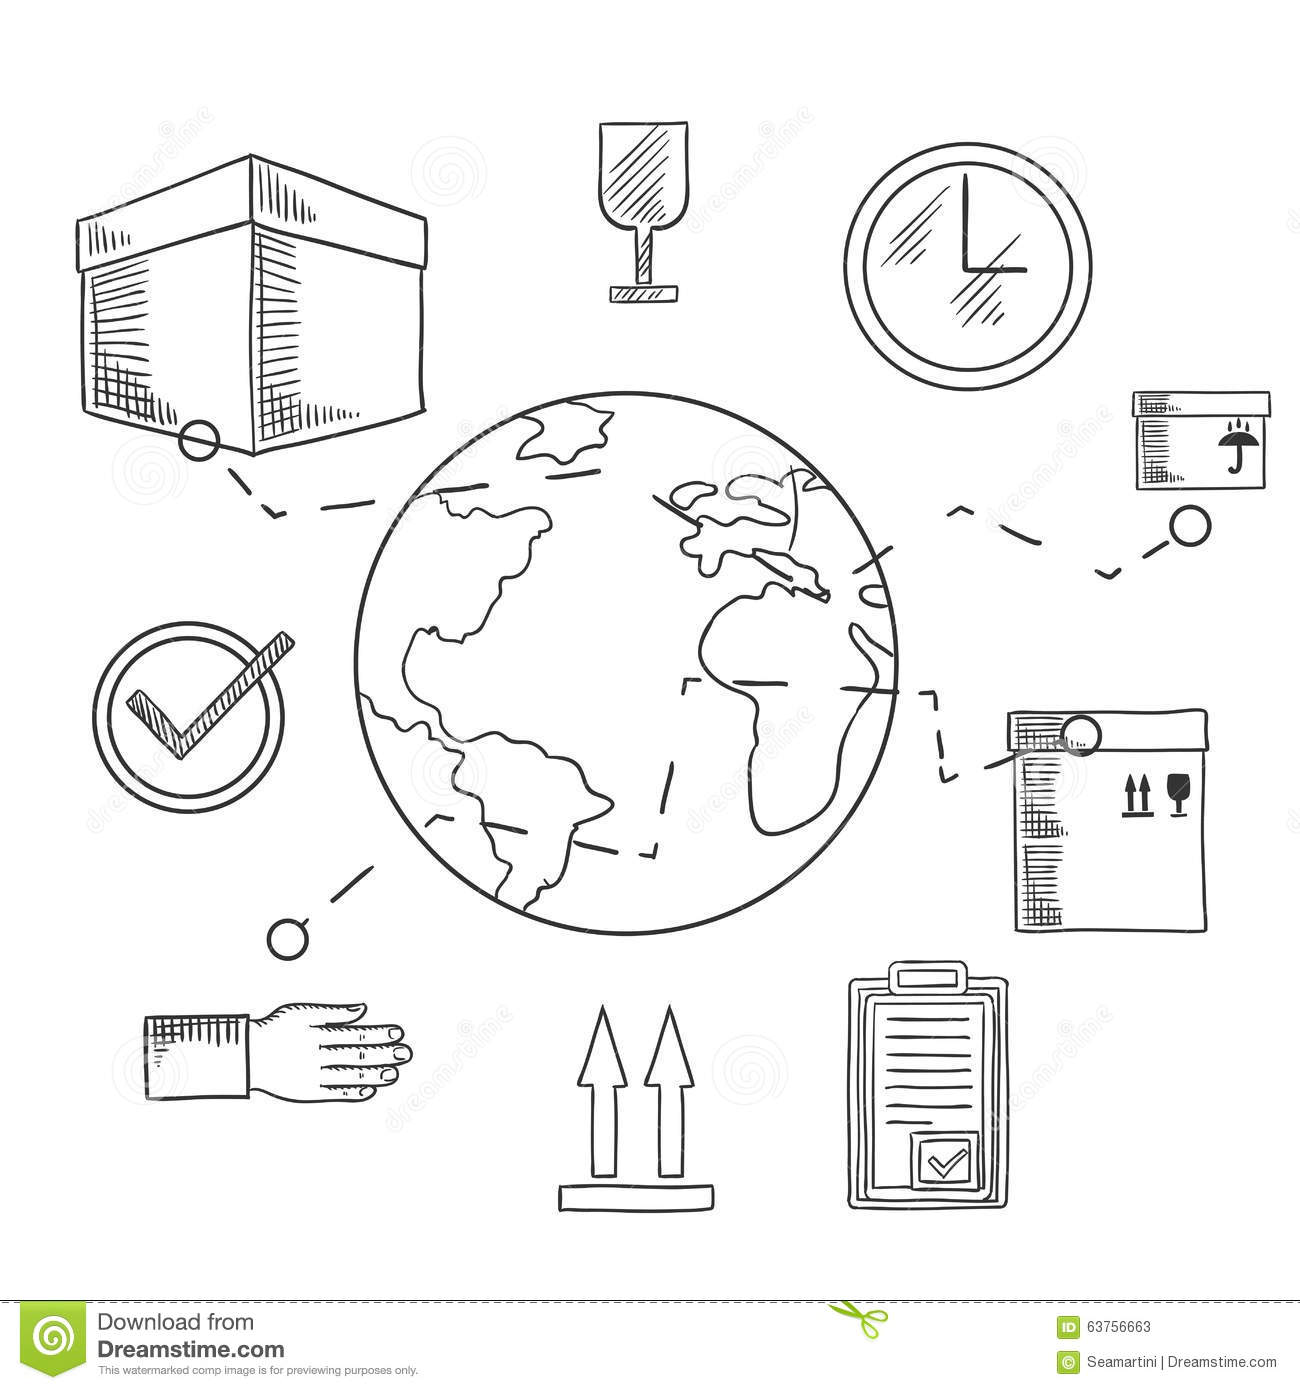 International Shipping And Delivery Service Icons Of Cardboard Boxes